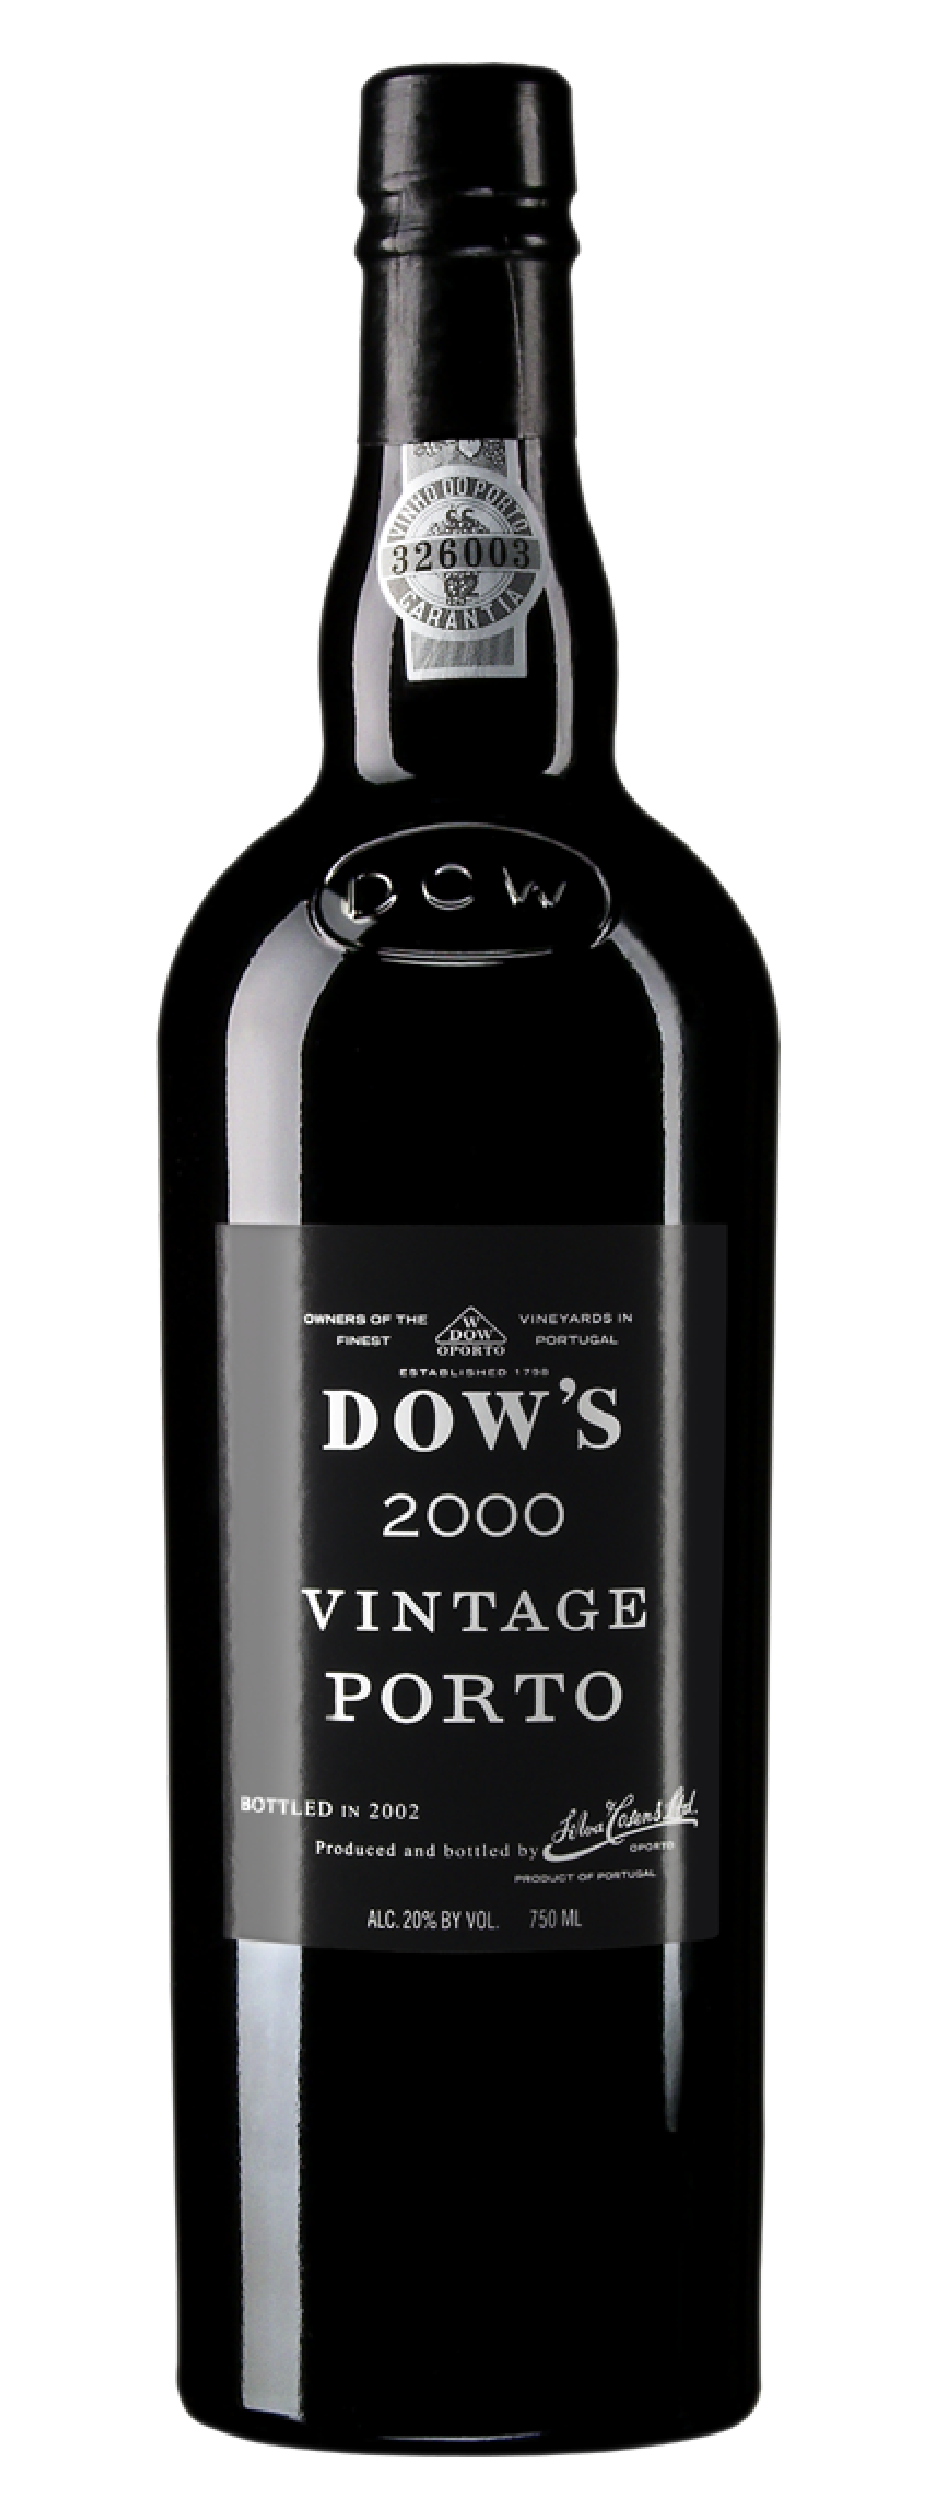 Product Image for DOW'S VINTAGE PORT 2000